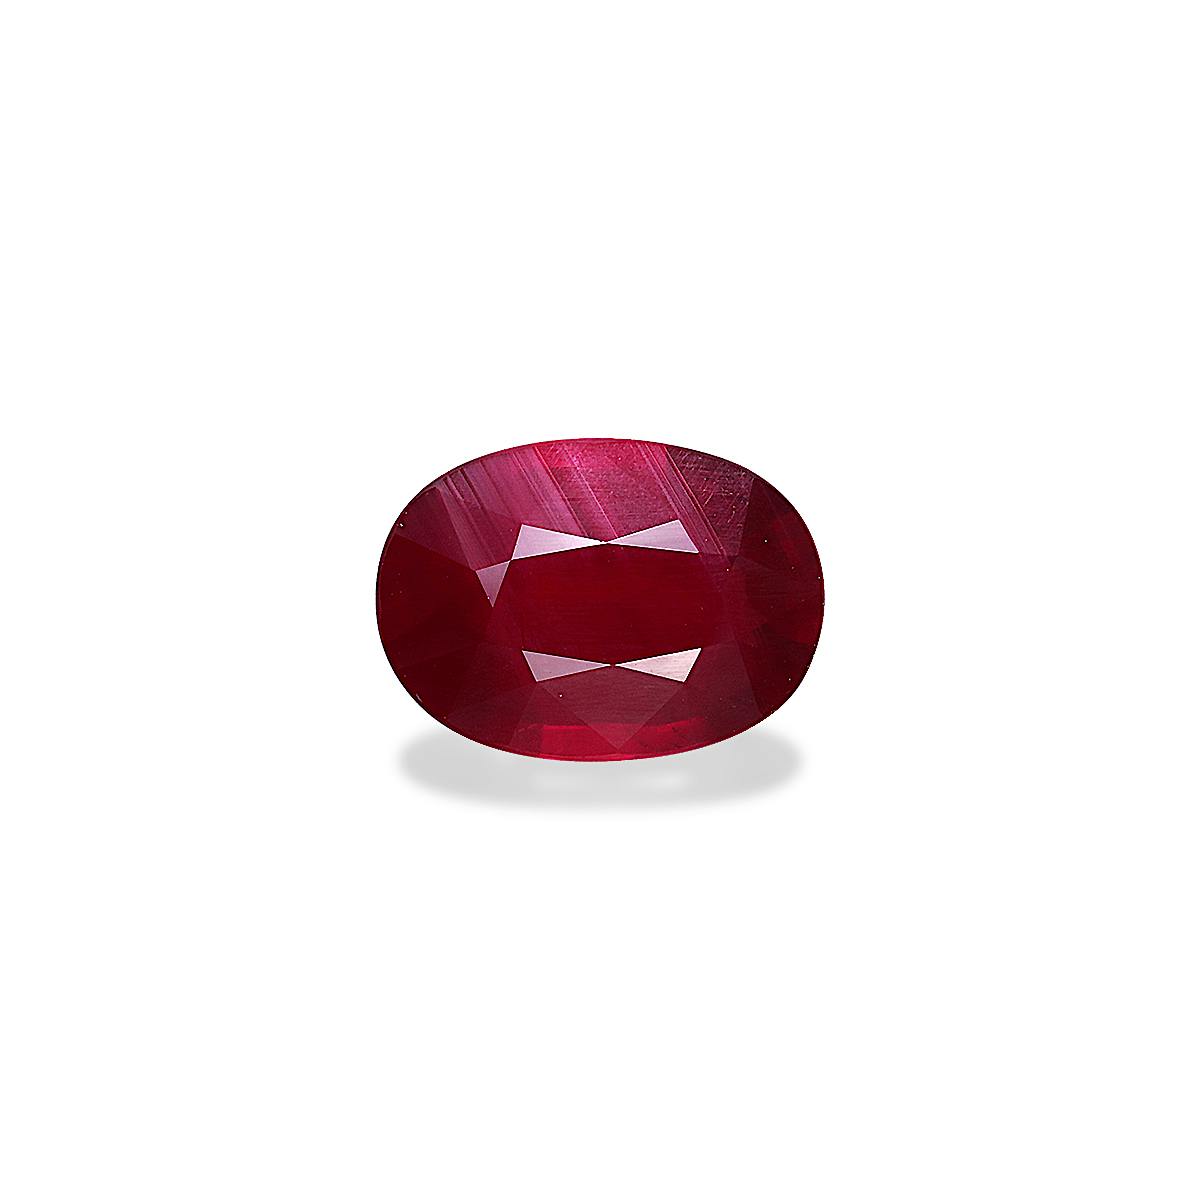 Mozambique Ruby 18.24ct - Main Image